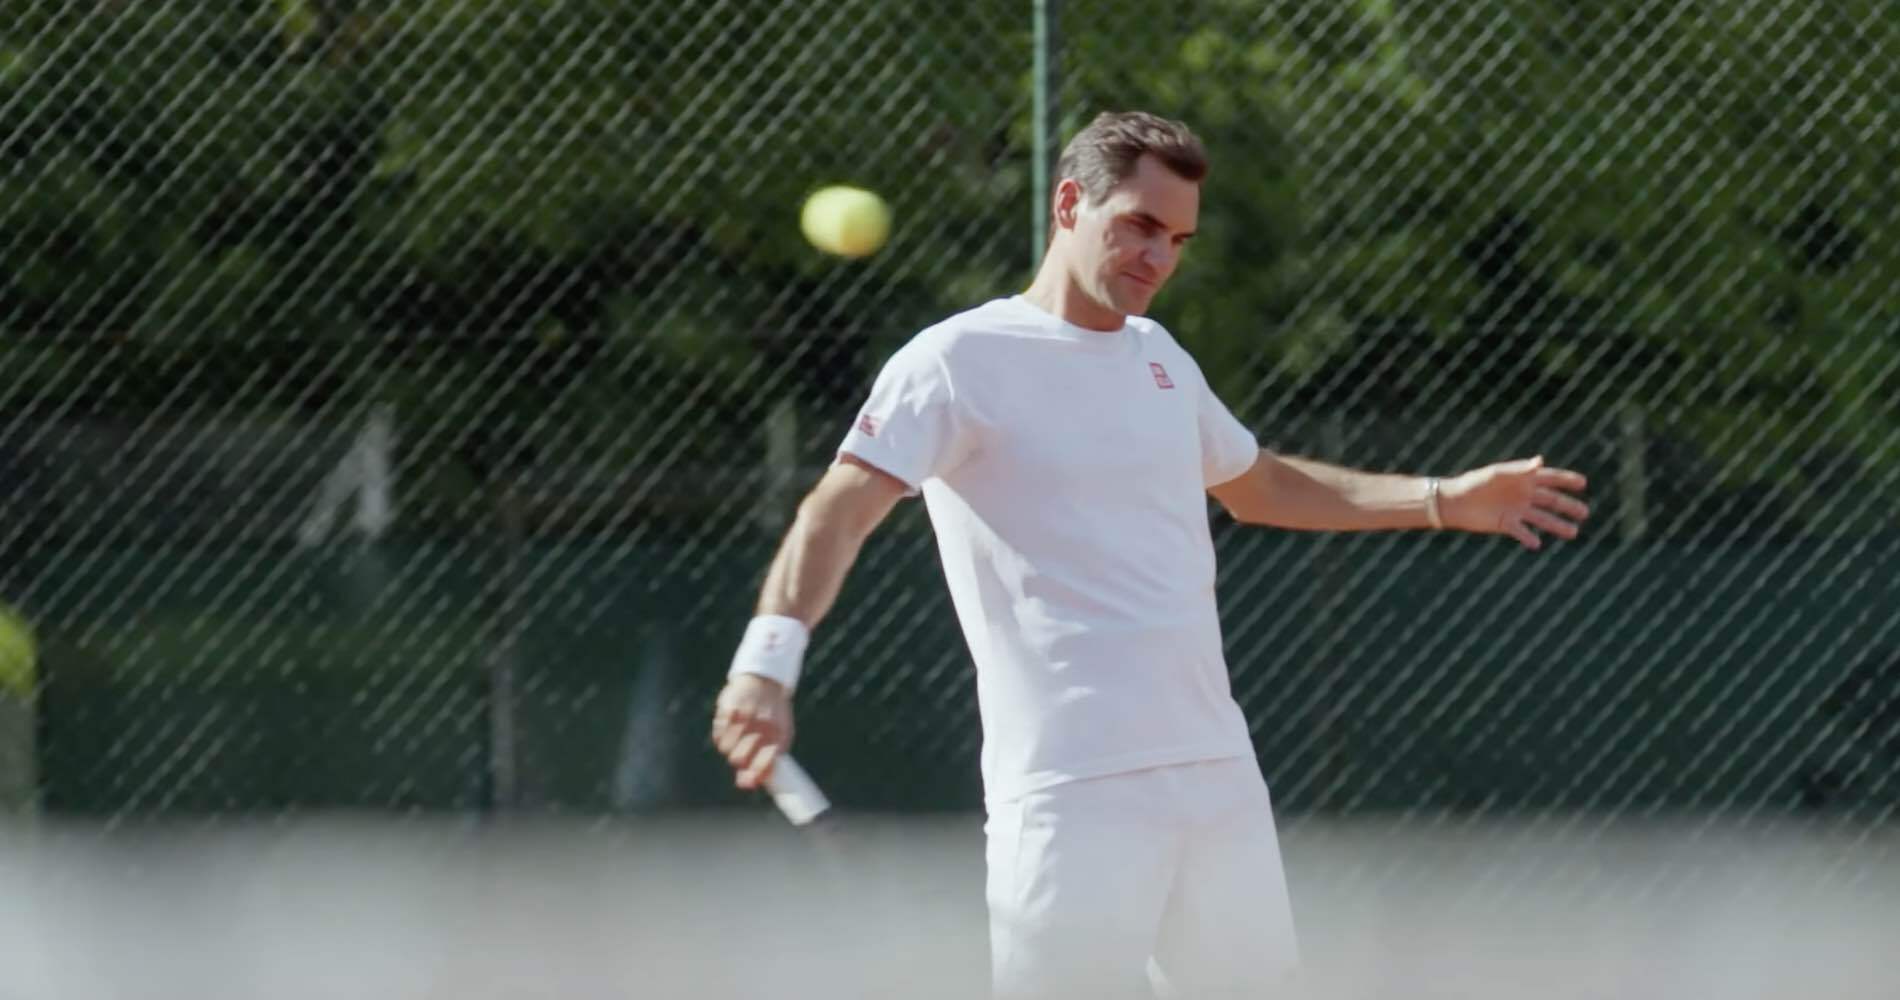 Roger Federer as seen in a commercial for Italian pasta brand Barilla